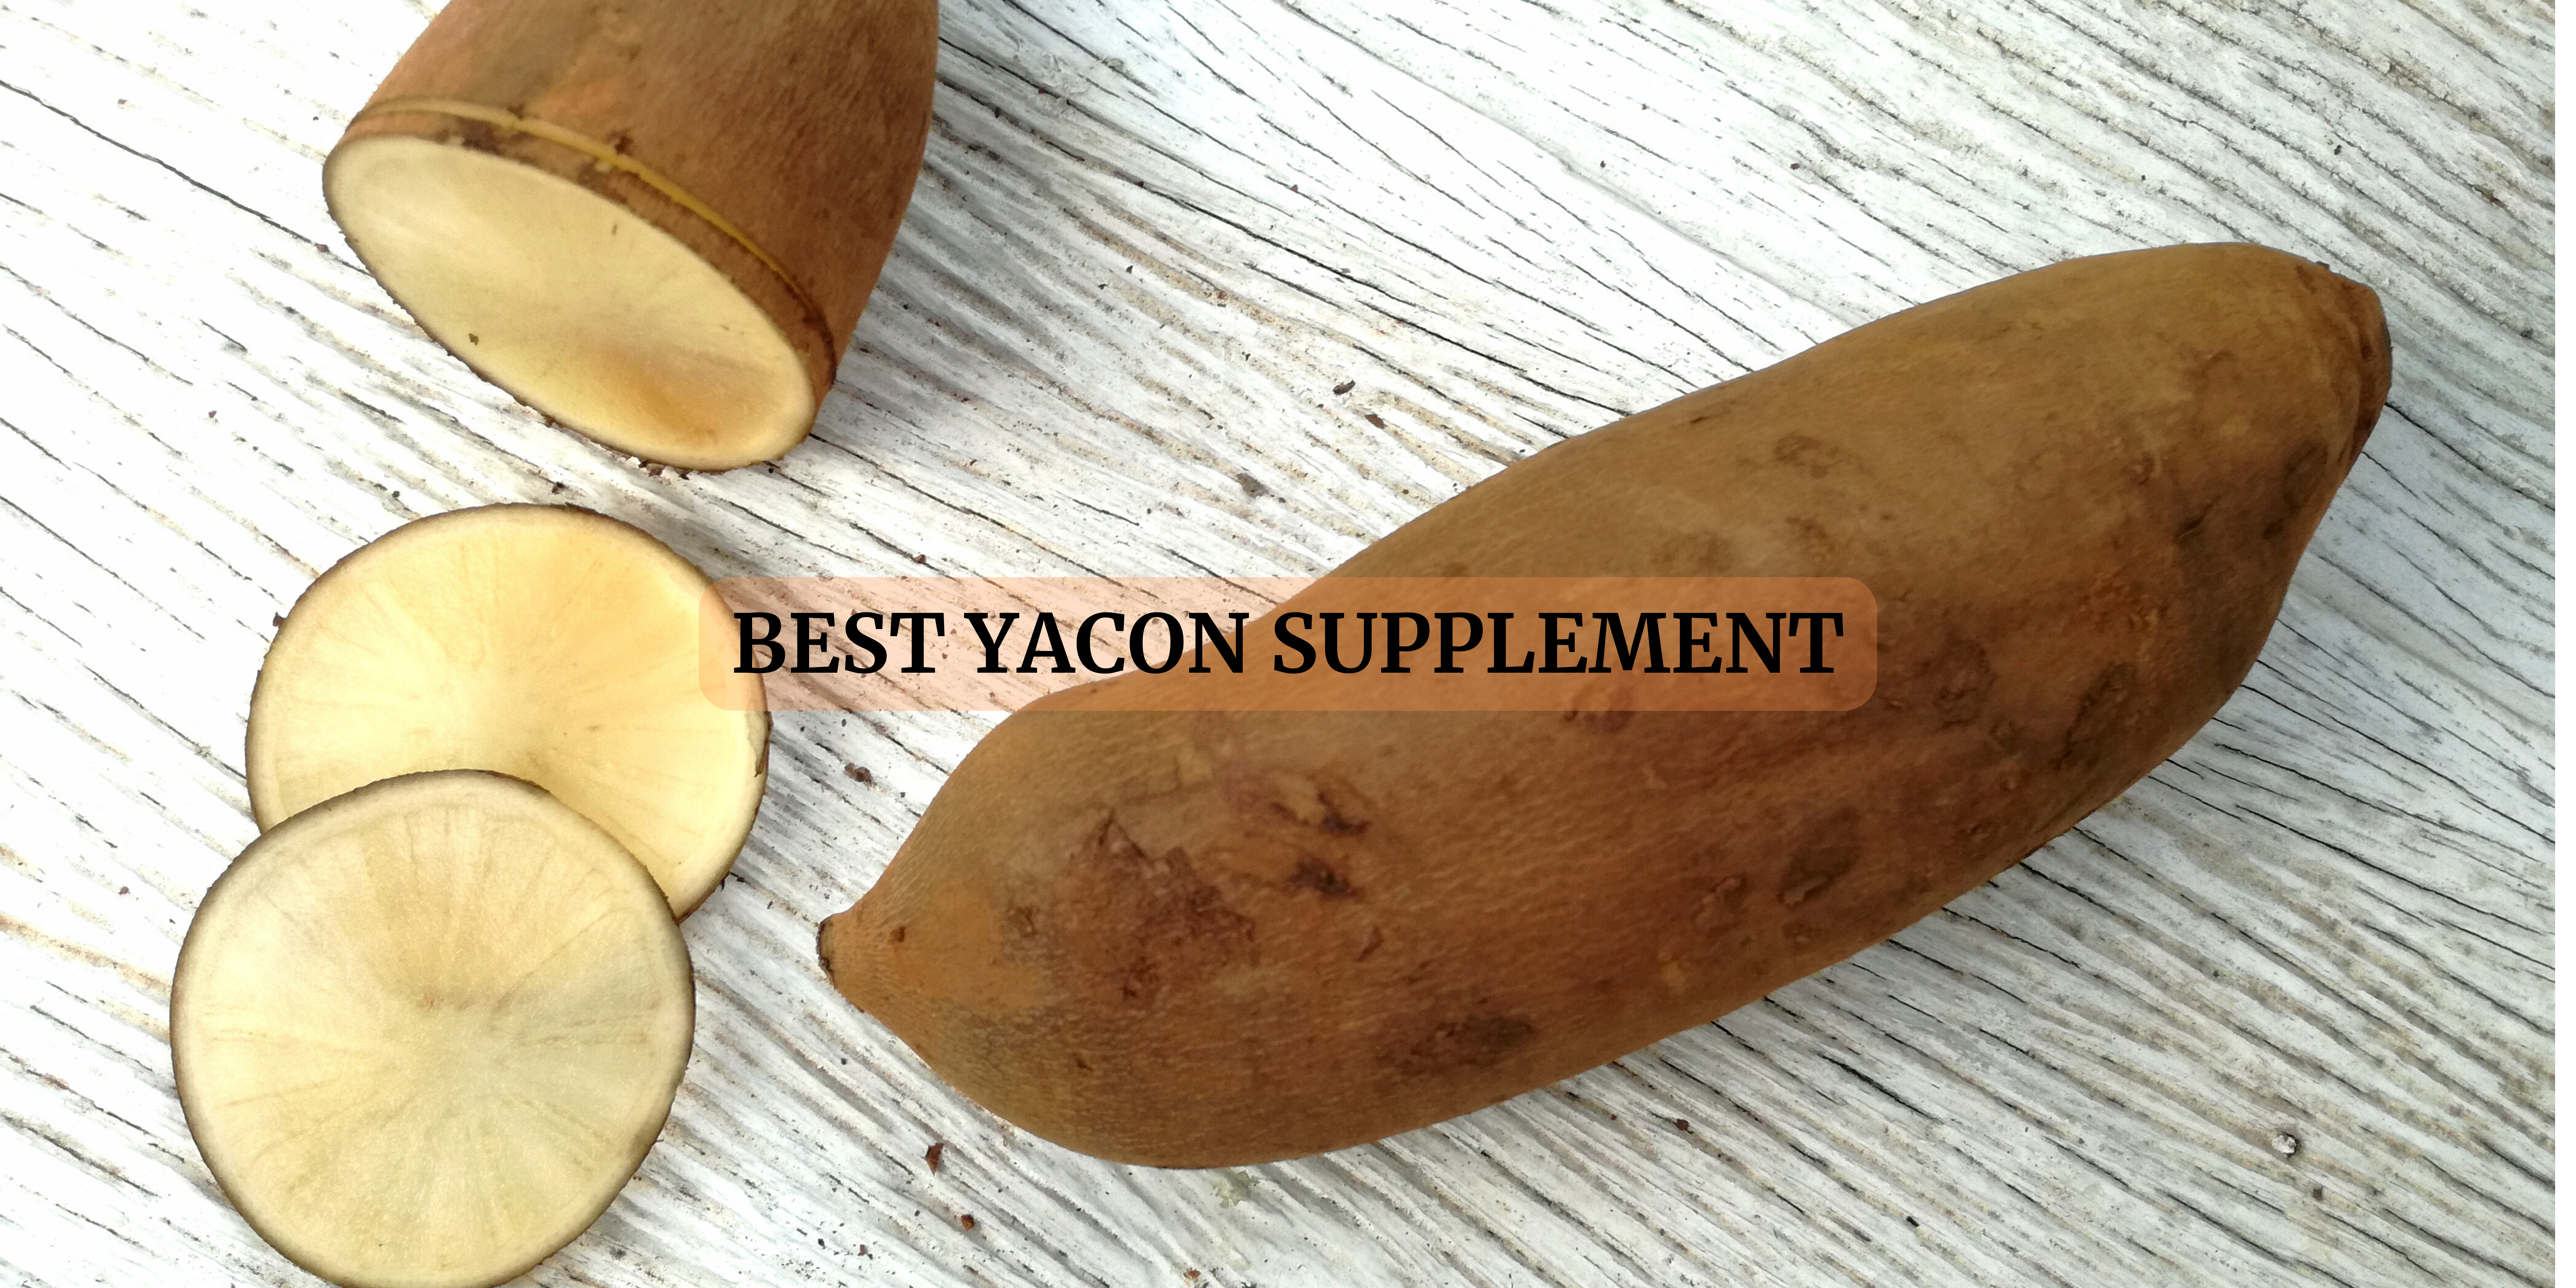 Yacon Supplements in the World